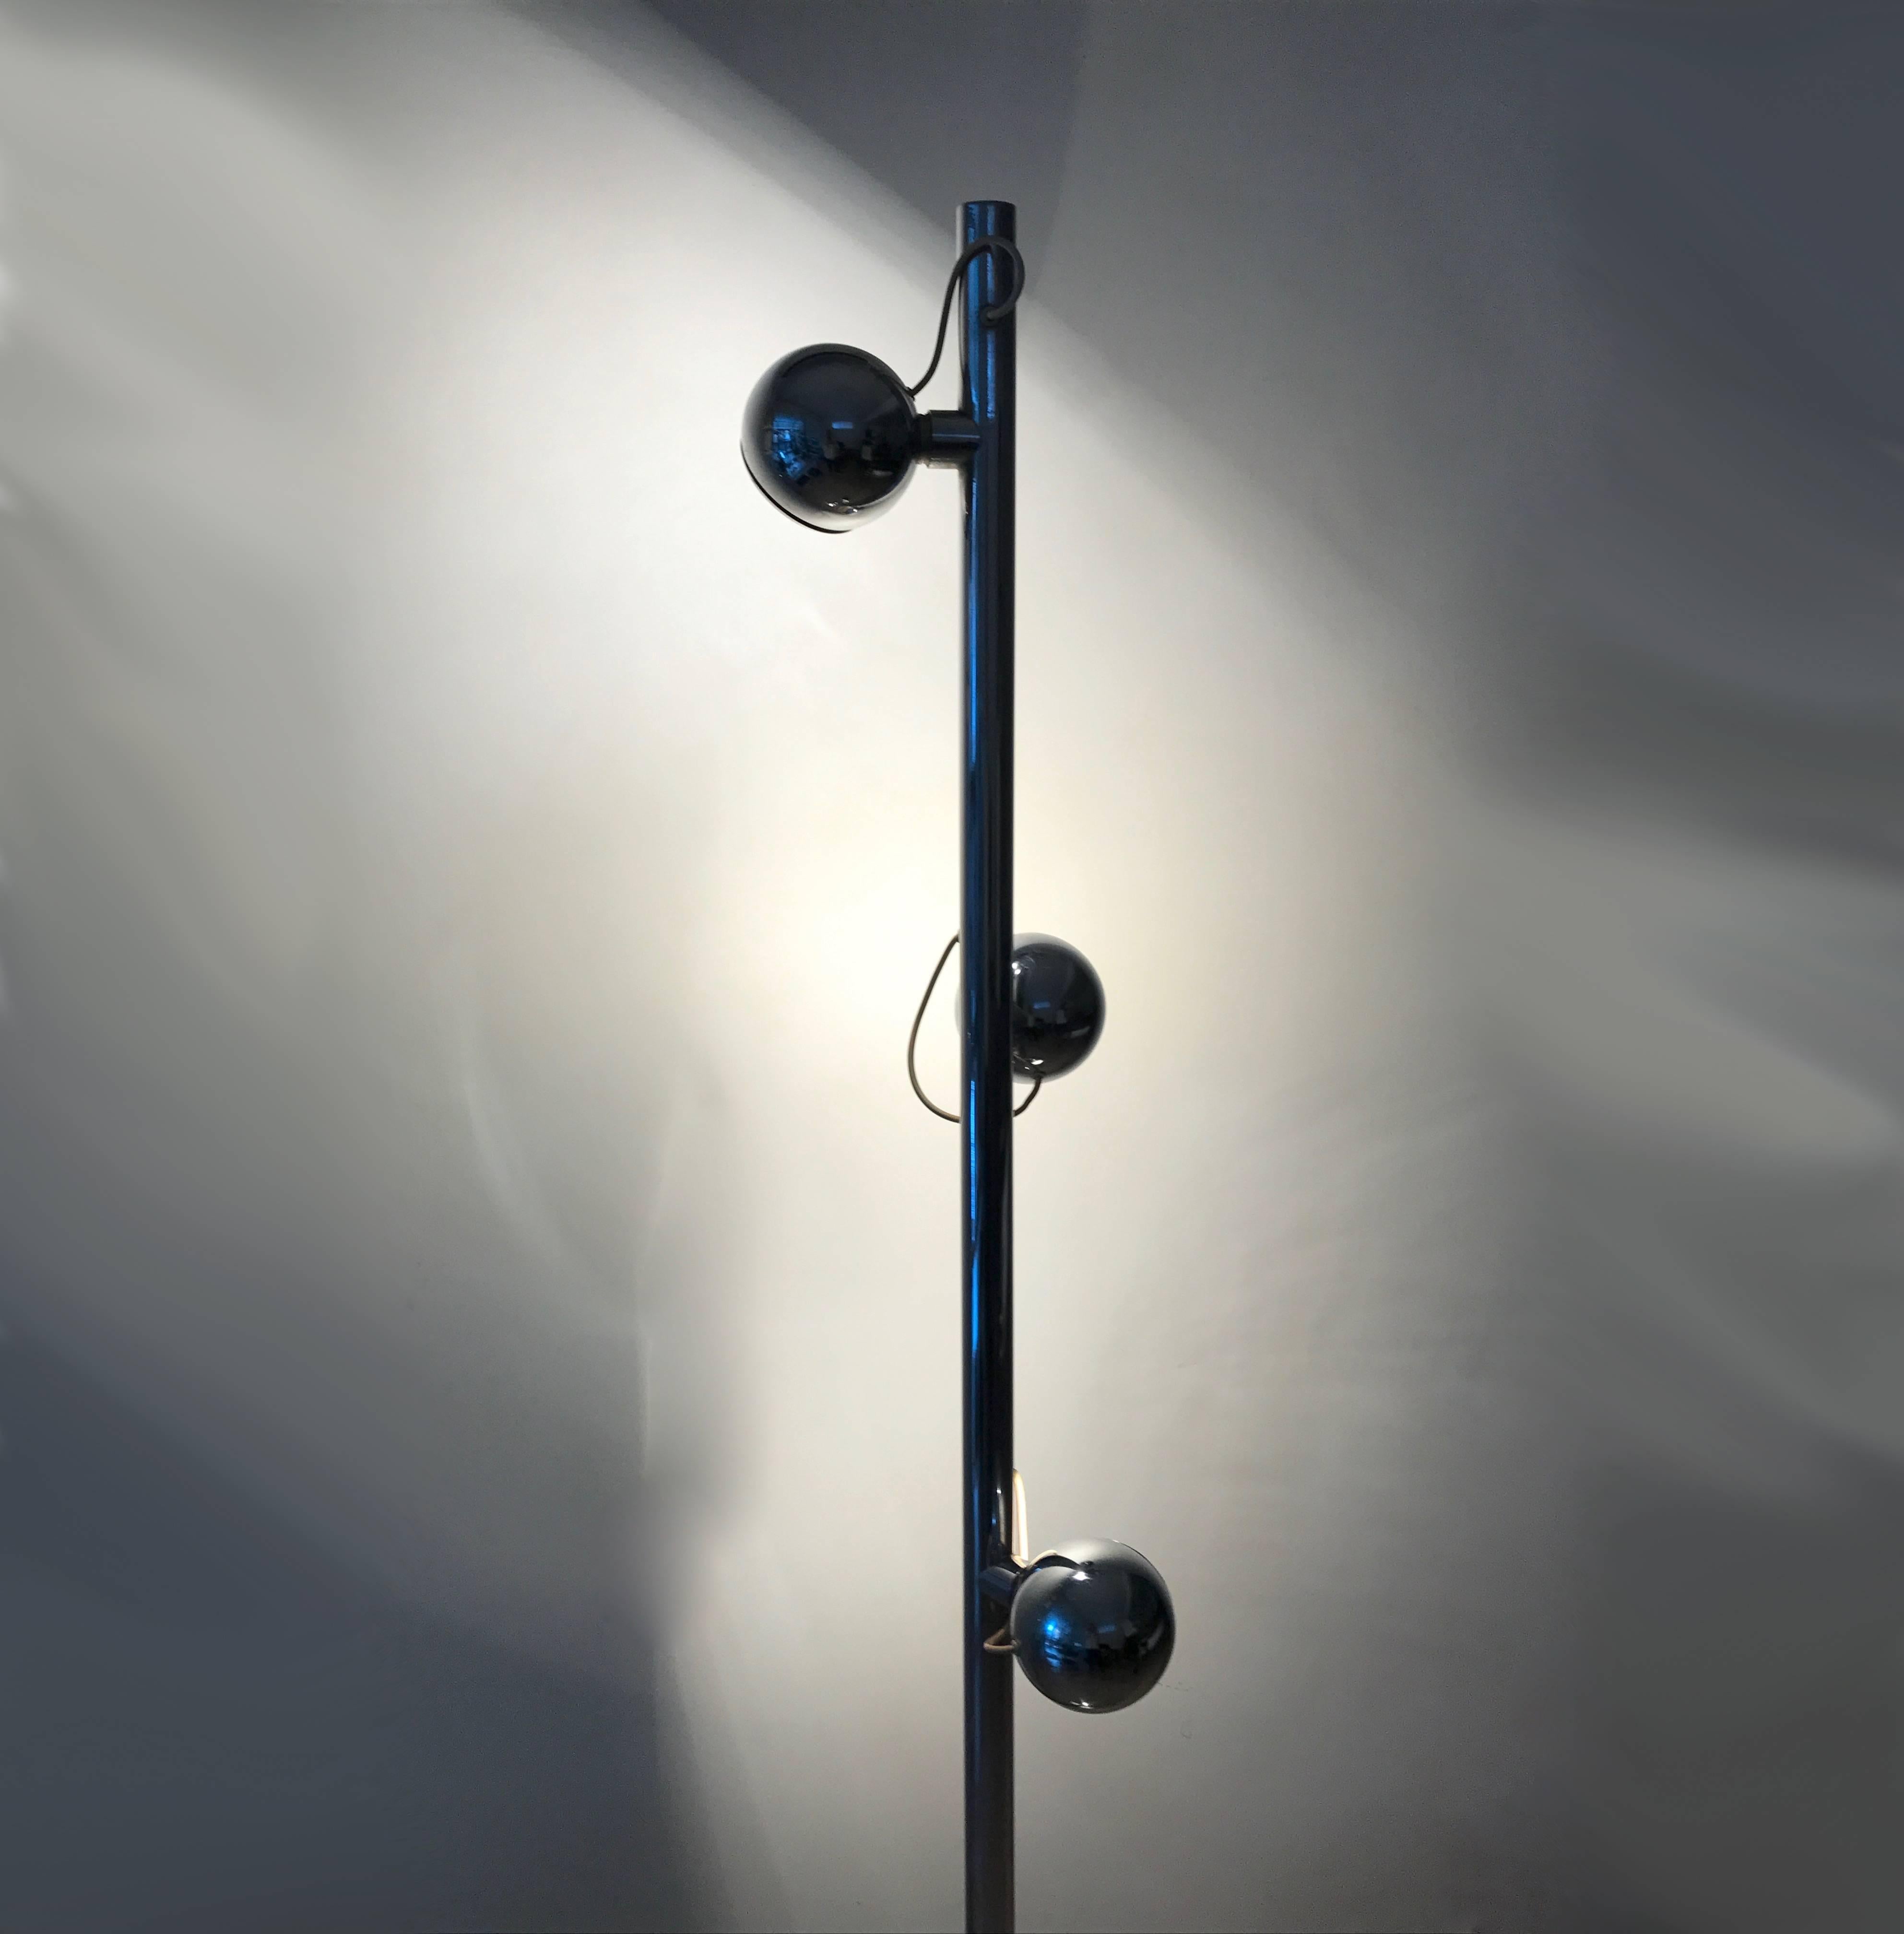 Beautiful floor lamp Luci, Milan, late 1970s.
with chromed metal frame, three adjustable ball shaped magnets, Italian production of Luci - Milano company, late 1970s.

Very good condition dimensions height 190 cm, base diameter 30 cm.